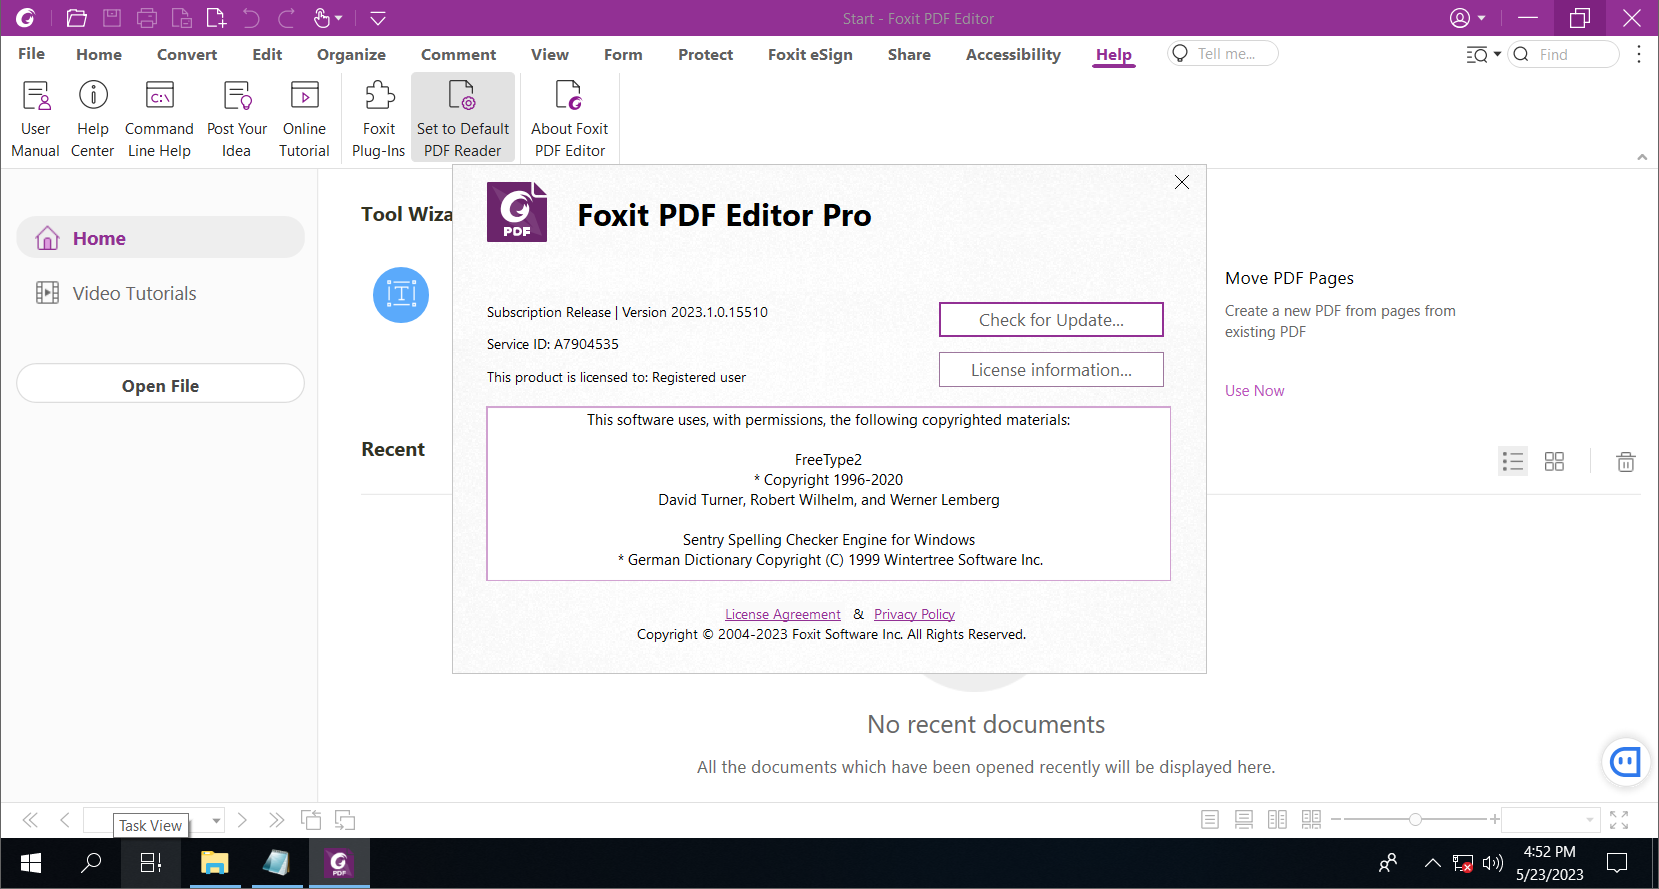 Working with Foxit PDF Editor Pro 2023.1.0.15510 full license